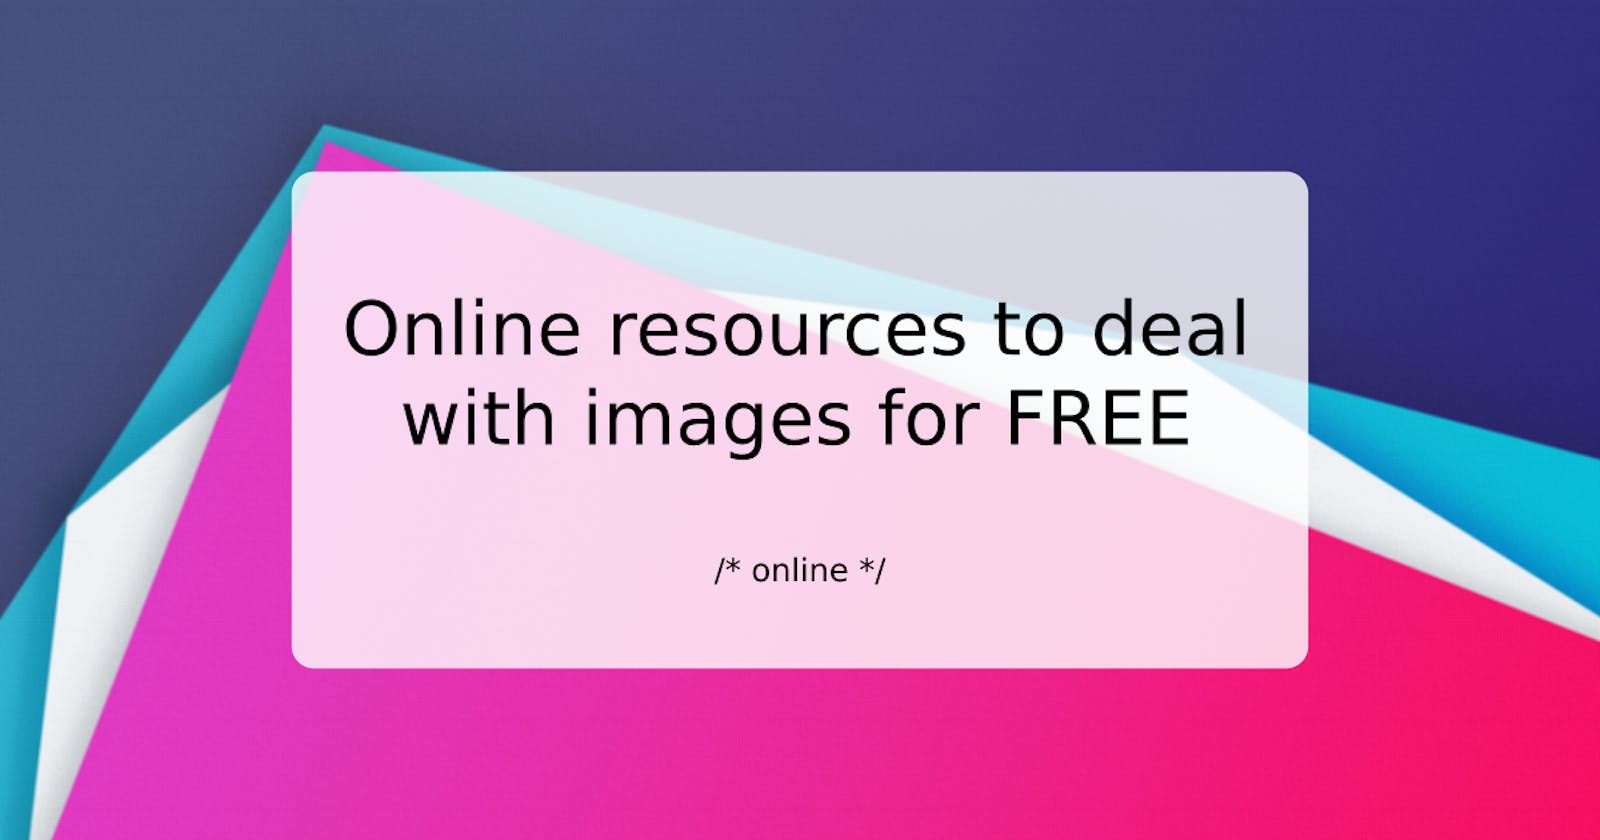 Online resources to deal with images for FREE